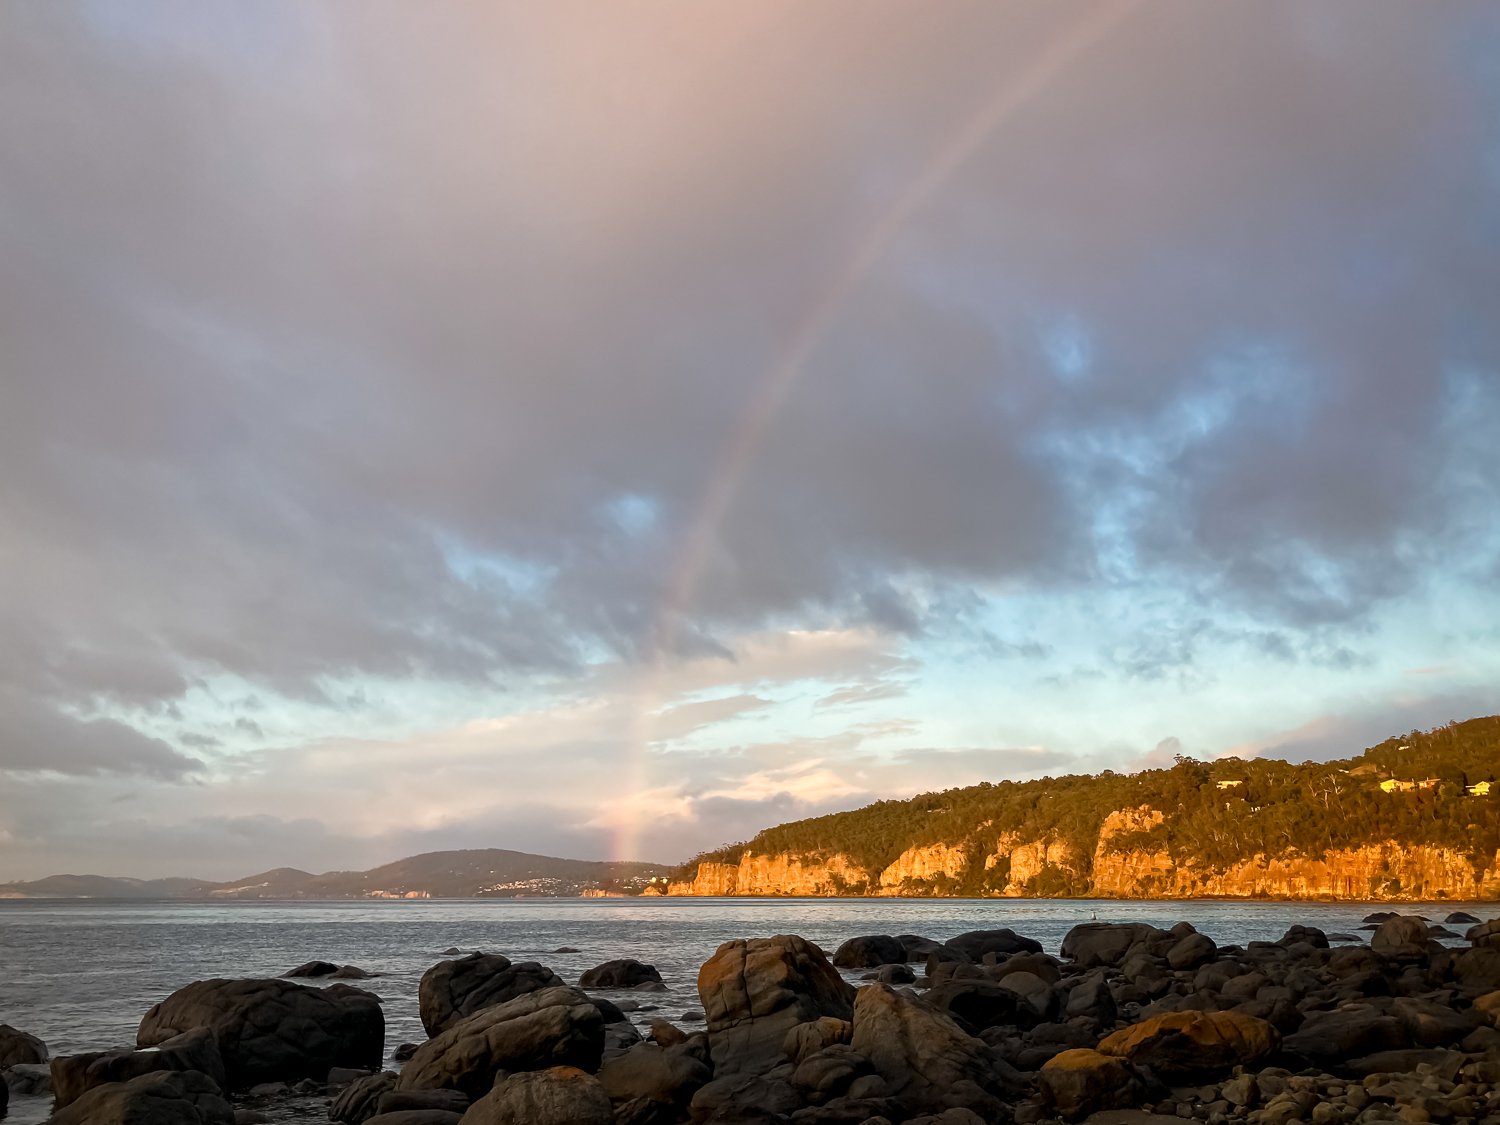 A rainbow over the cliffs at the beach in the morning light